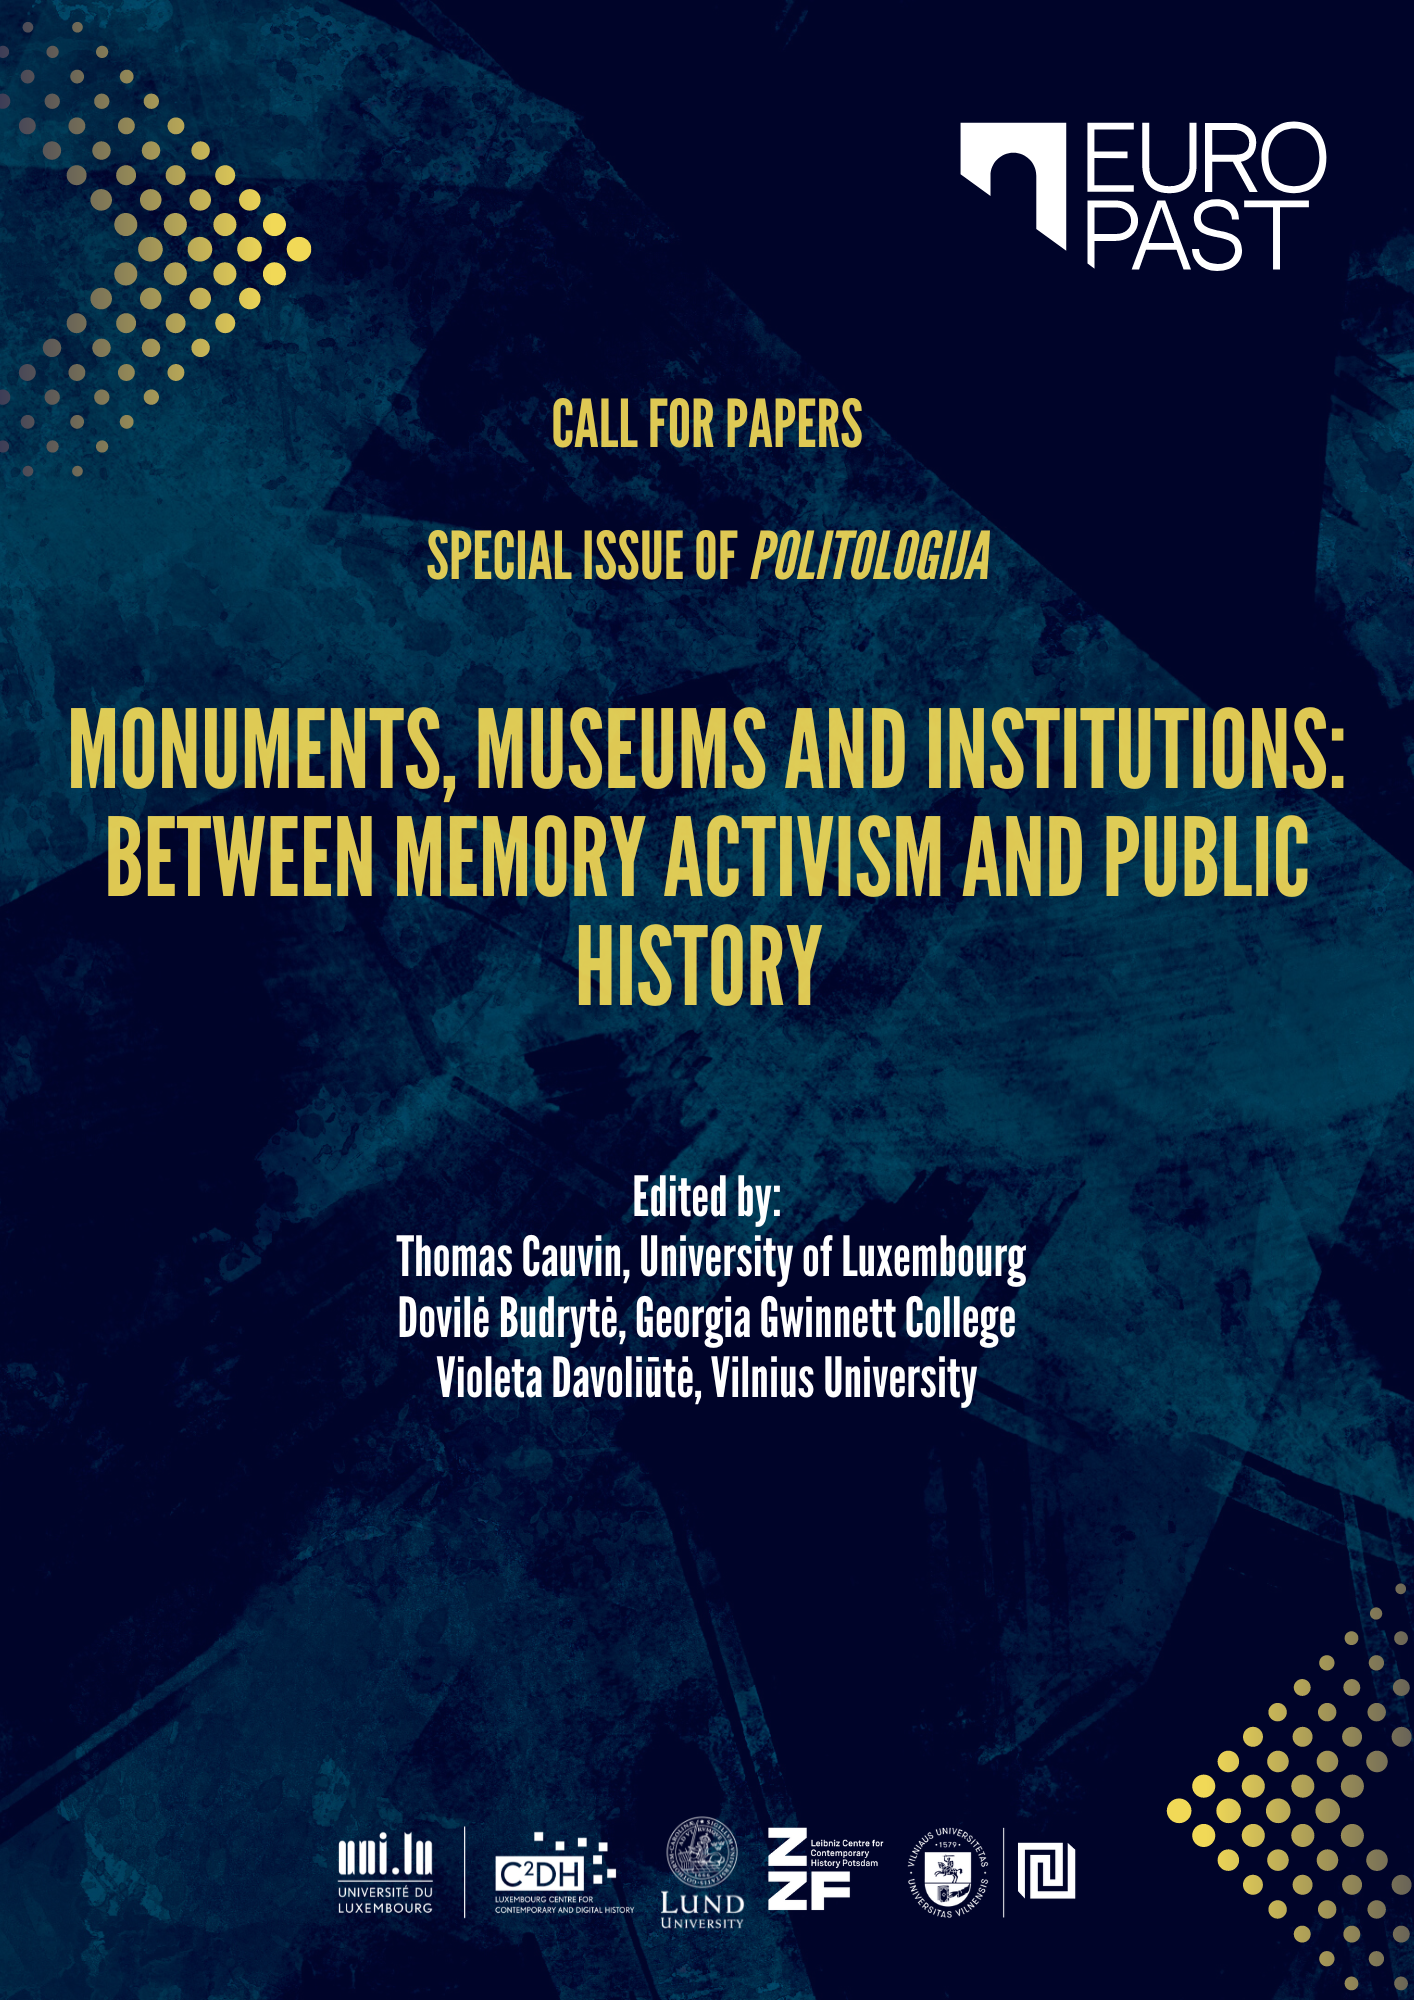 Call for Papers: Special Issue of POLITOLOGIJA “Monuments, Museums and Institutions: between Memory Activism and Public History”